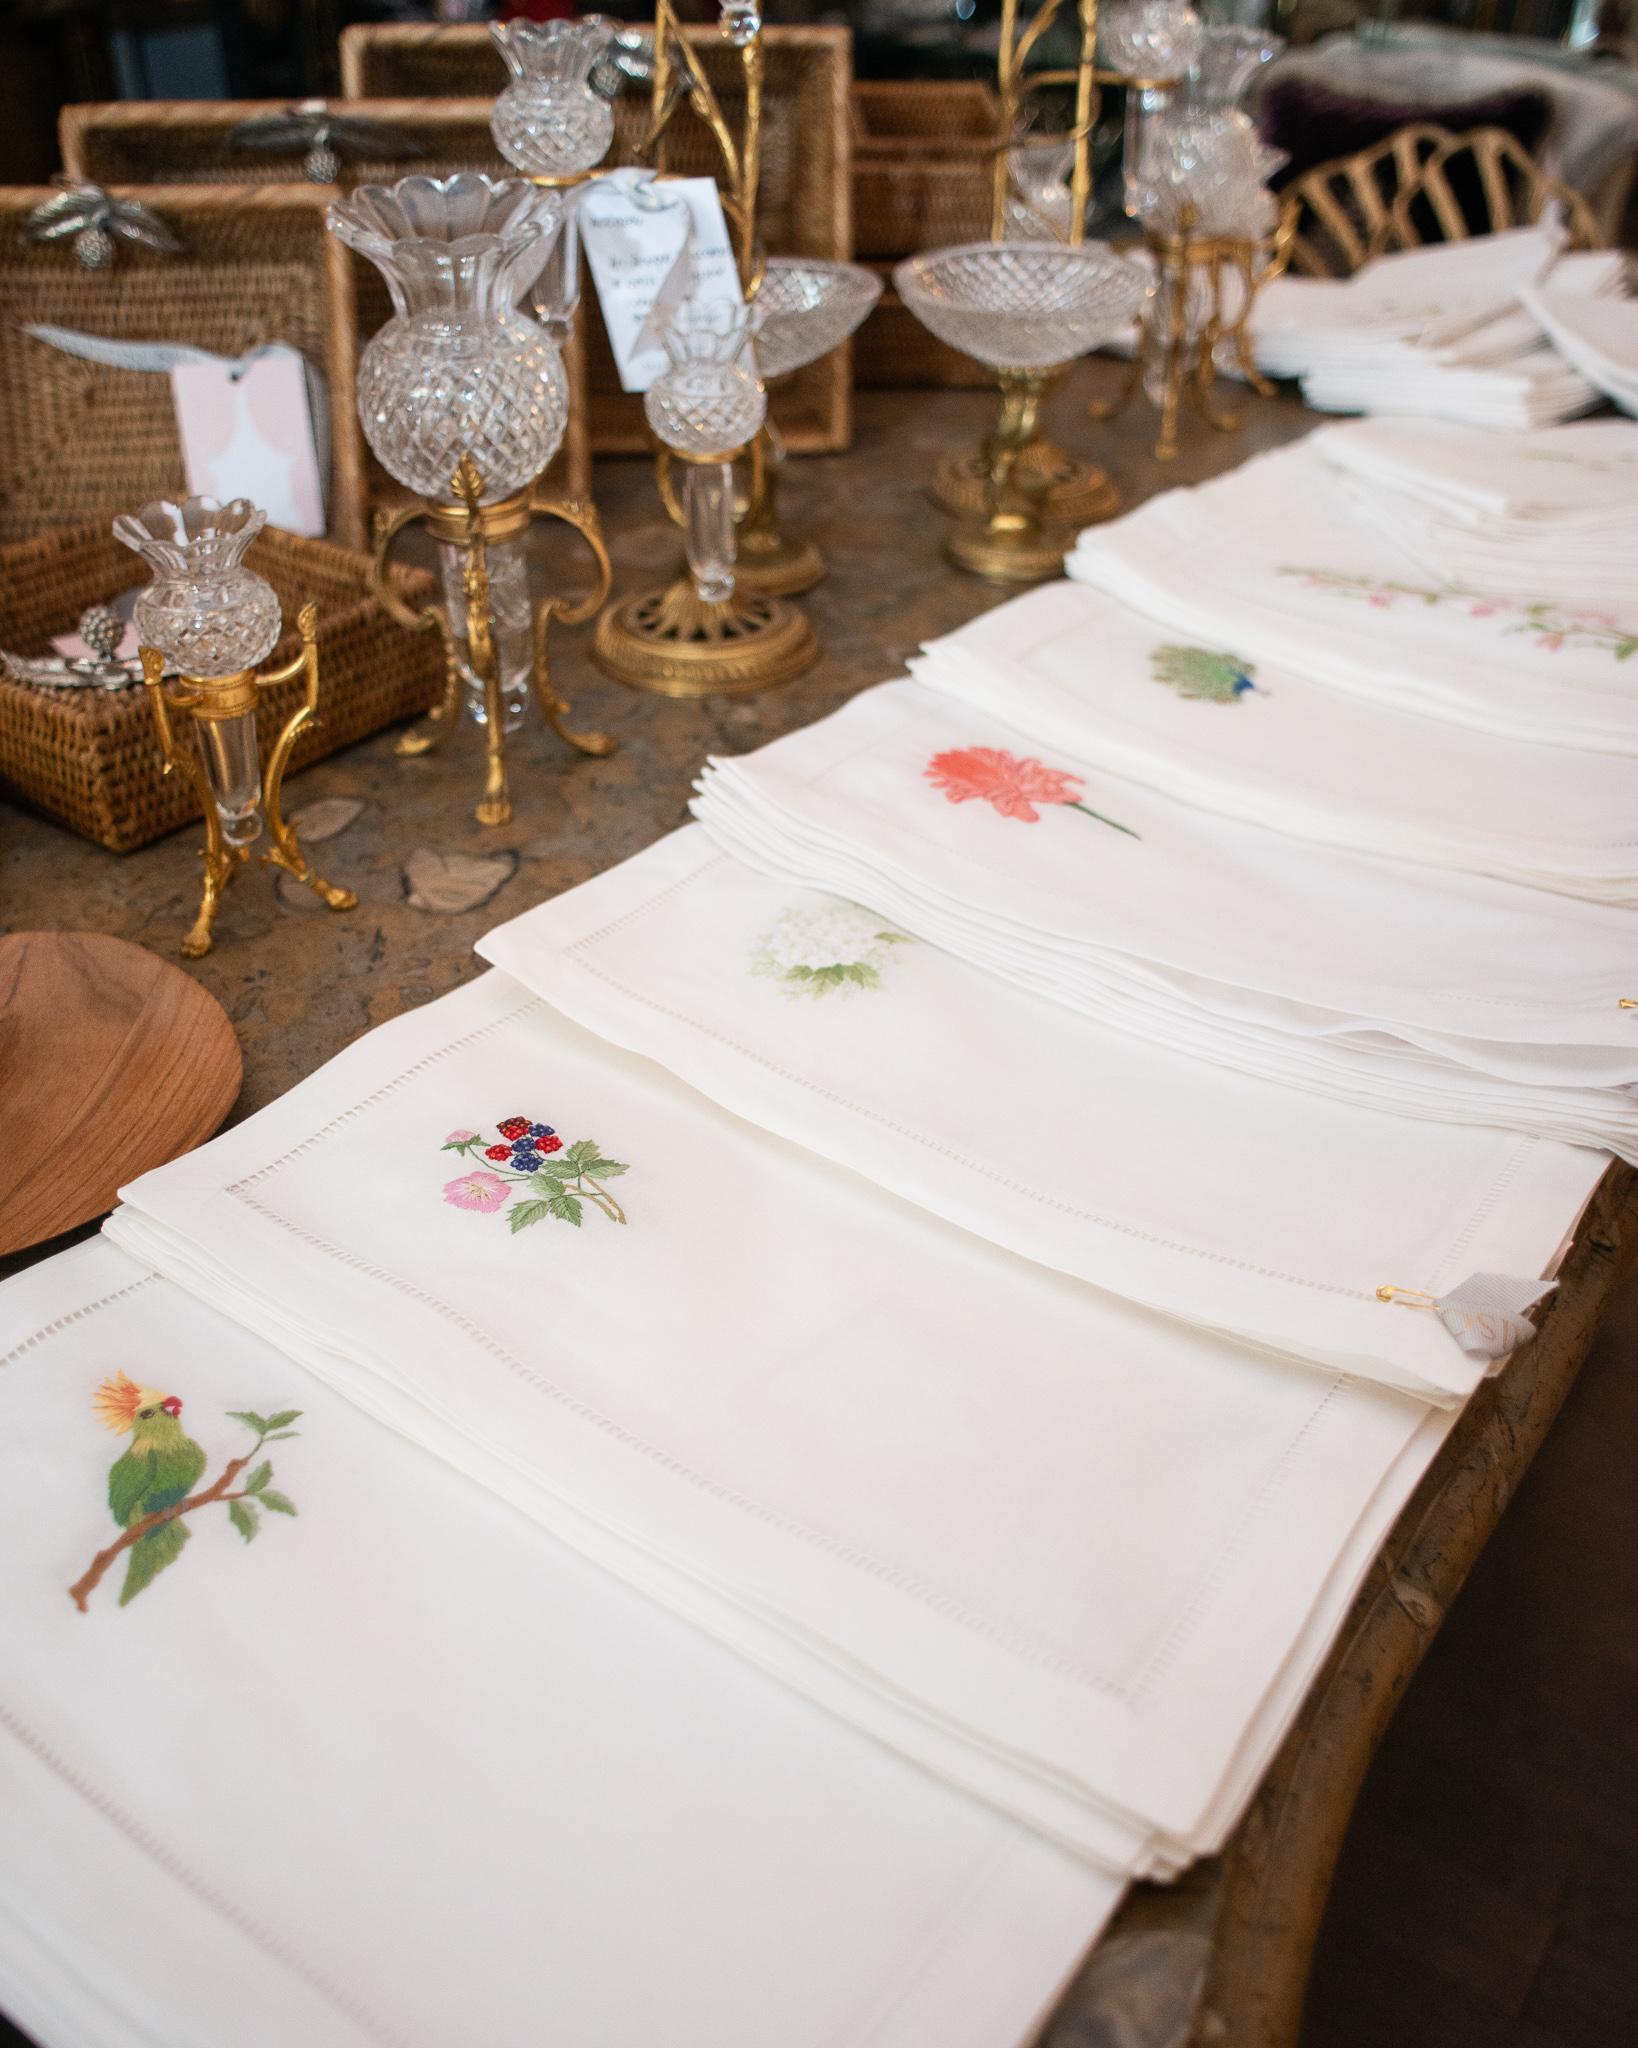 A stunning set of 12 hand embroidered linen placemats, made by hand in Portugal and embroidered with multi-color flowers. A unique blend of timeless European inspiration and Classic design expressed in the finest materials and finishes. Operating